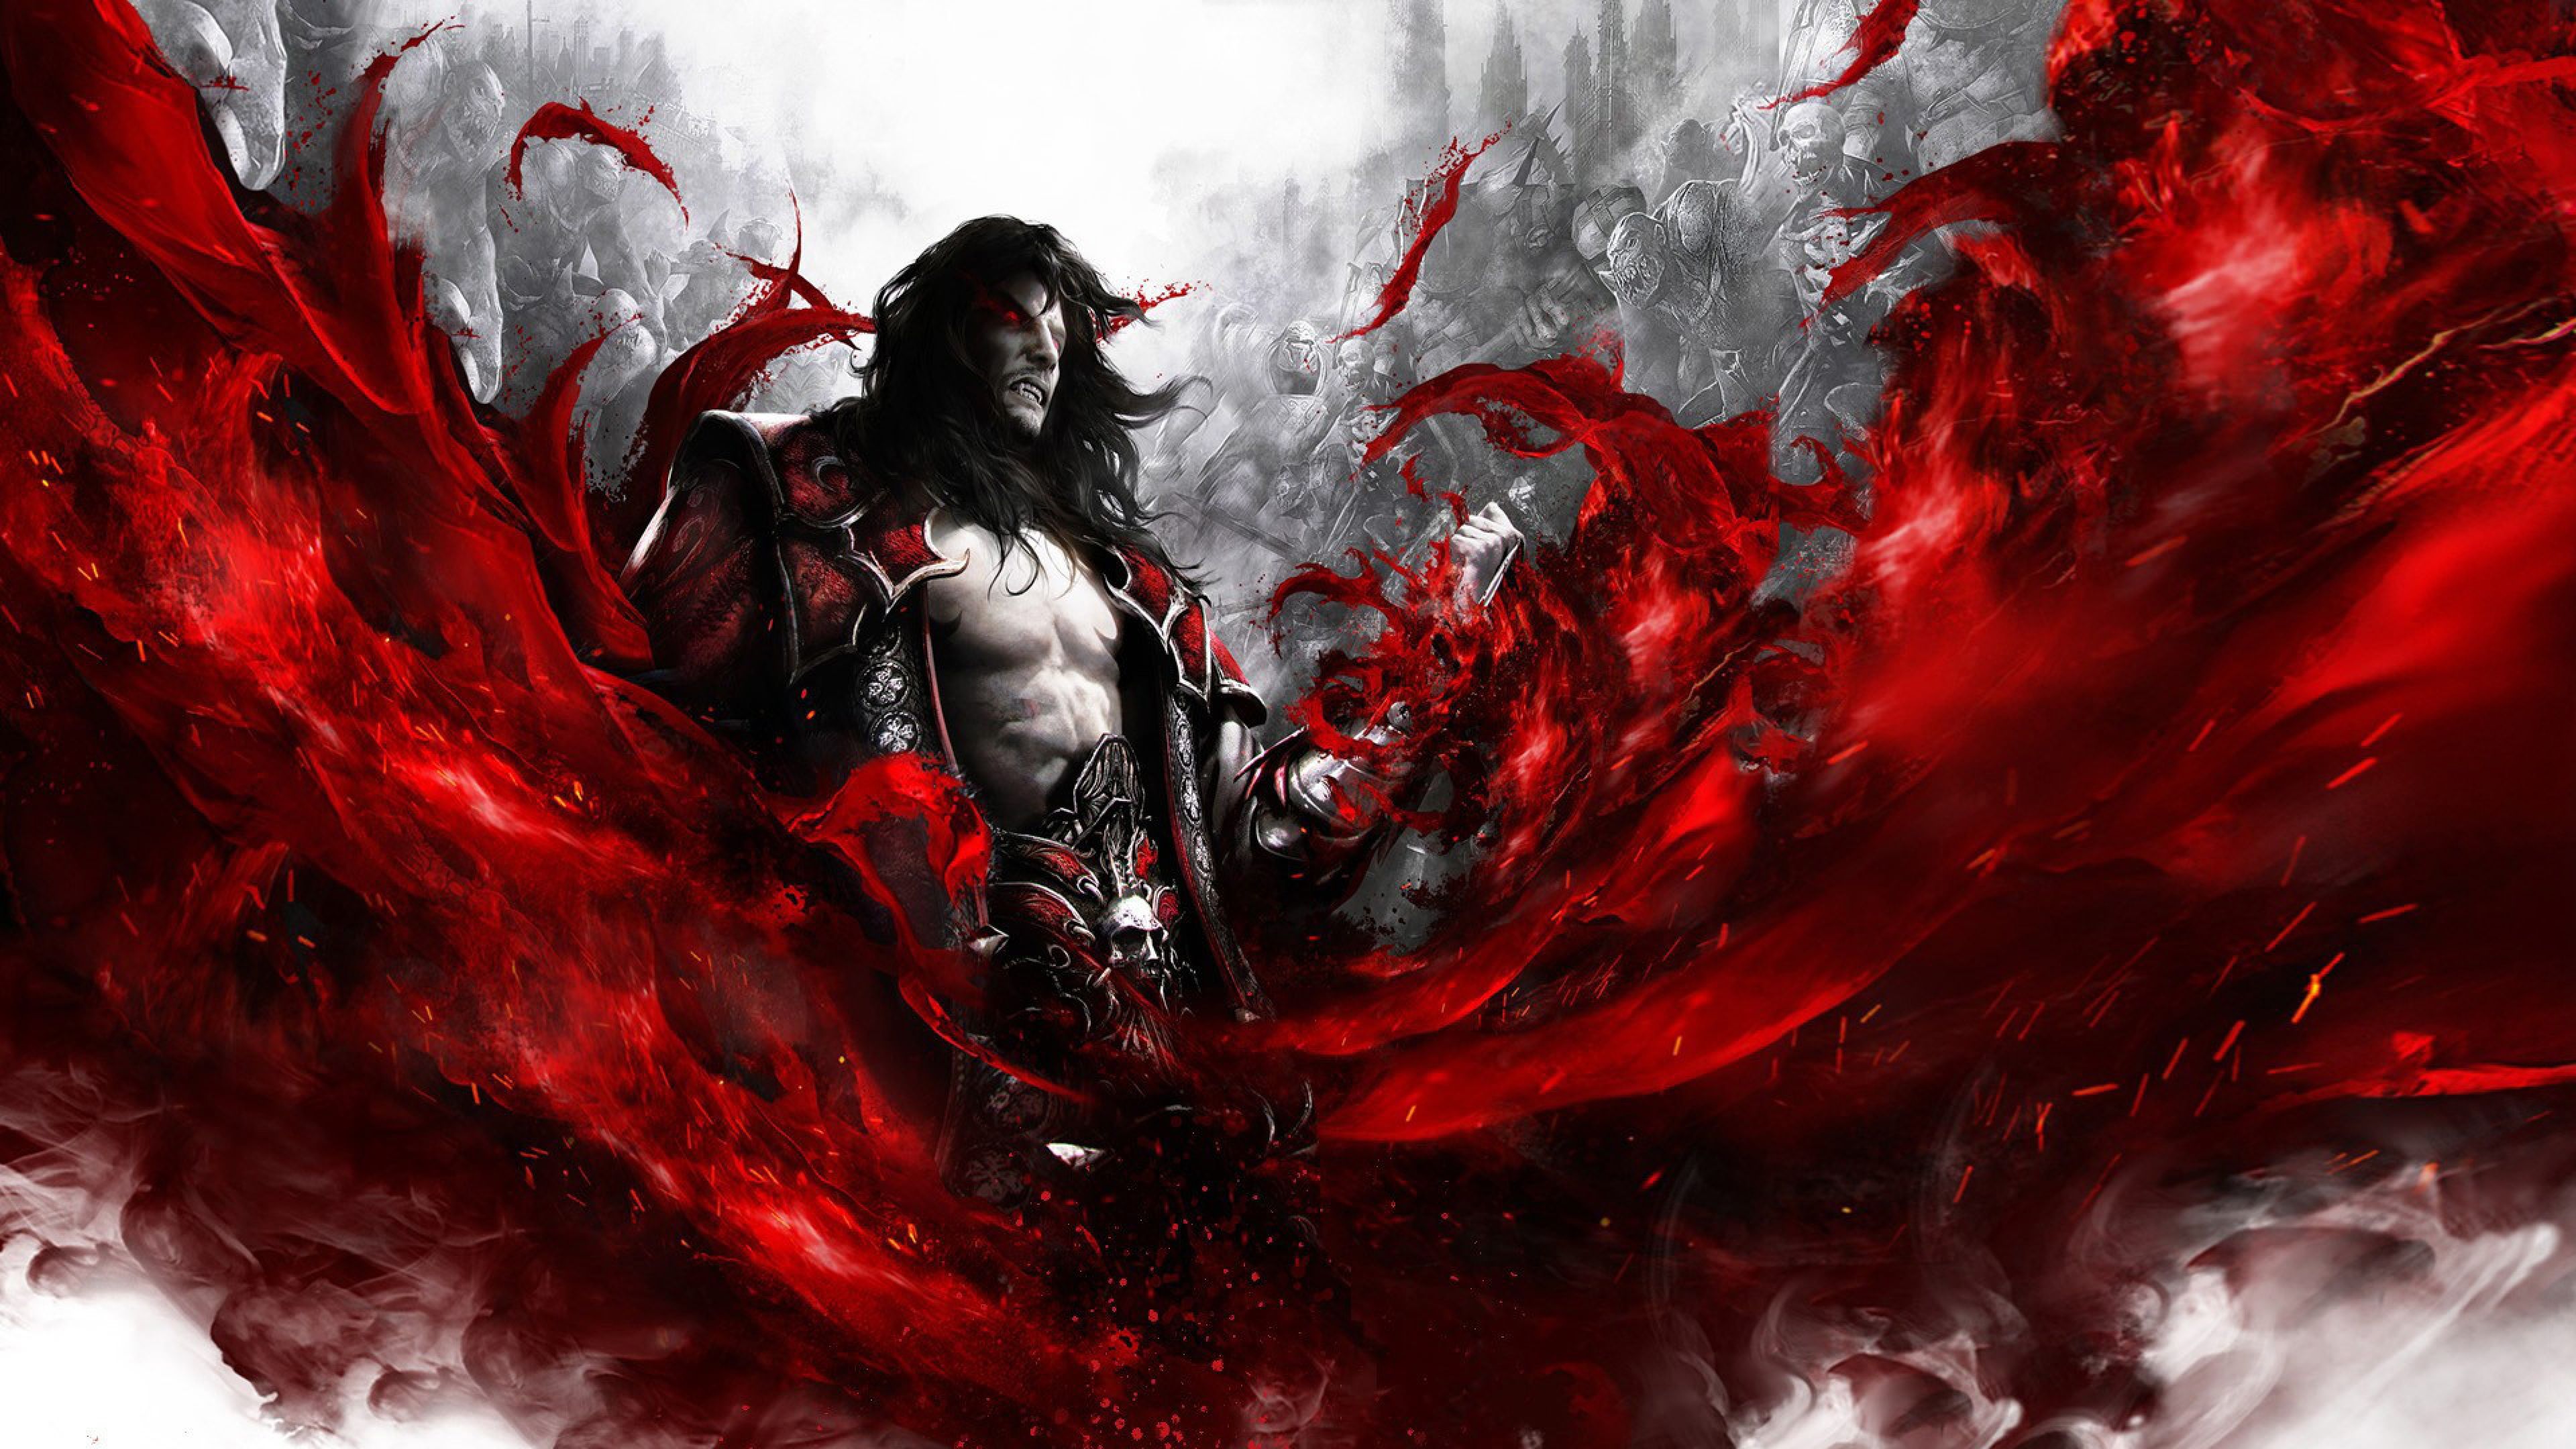 Video Game Castlevania: Lords Of Shadow HD Wallpaper